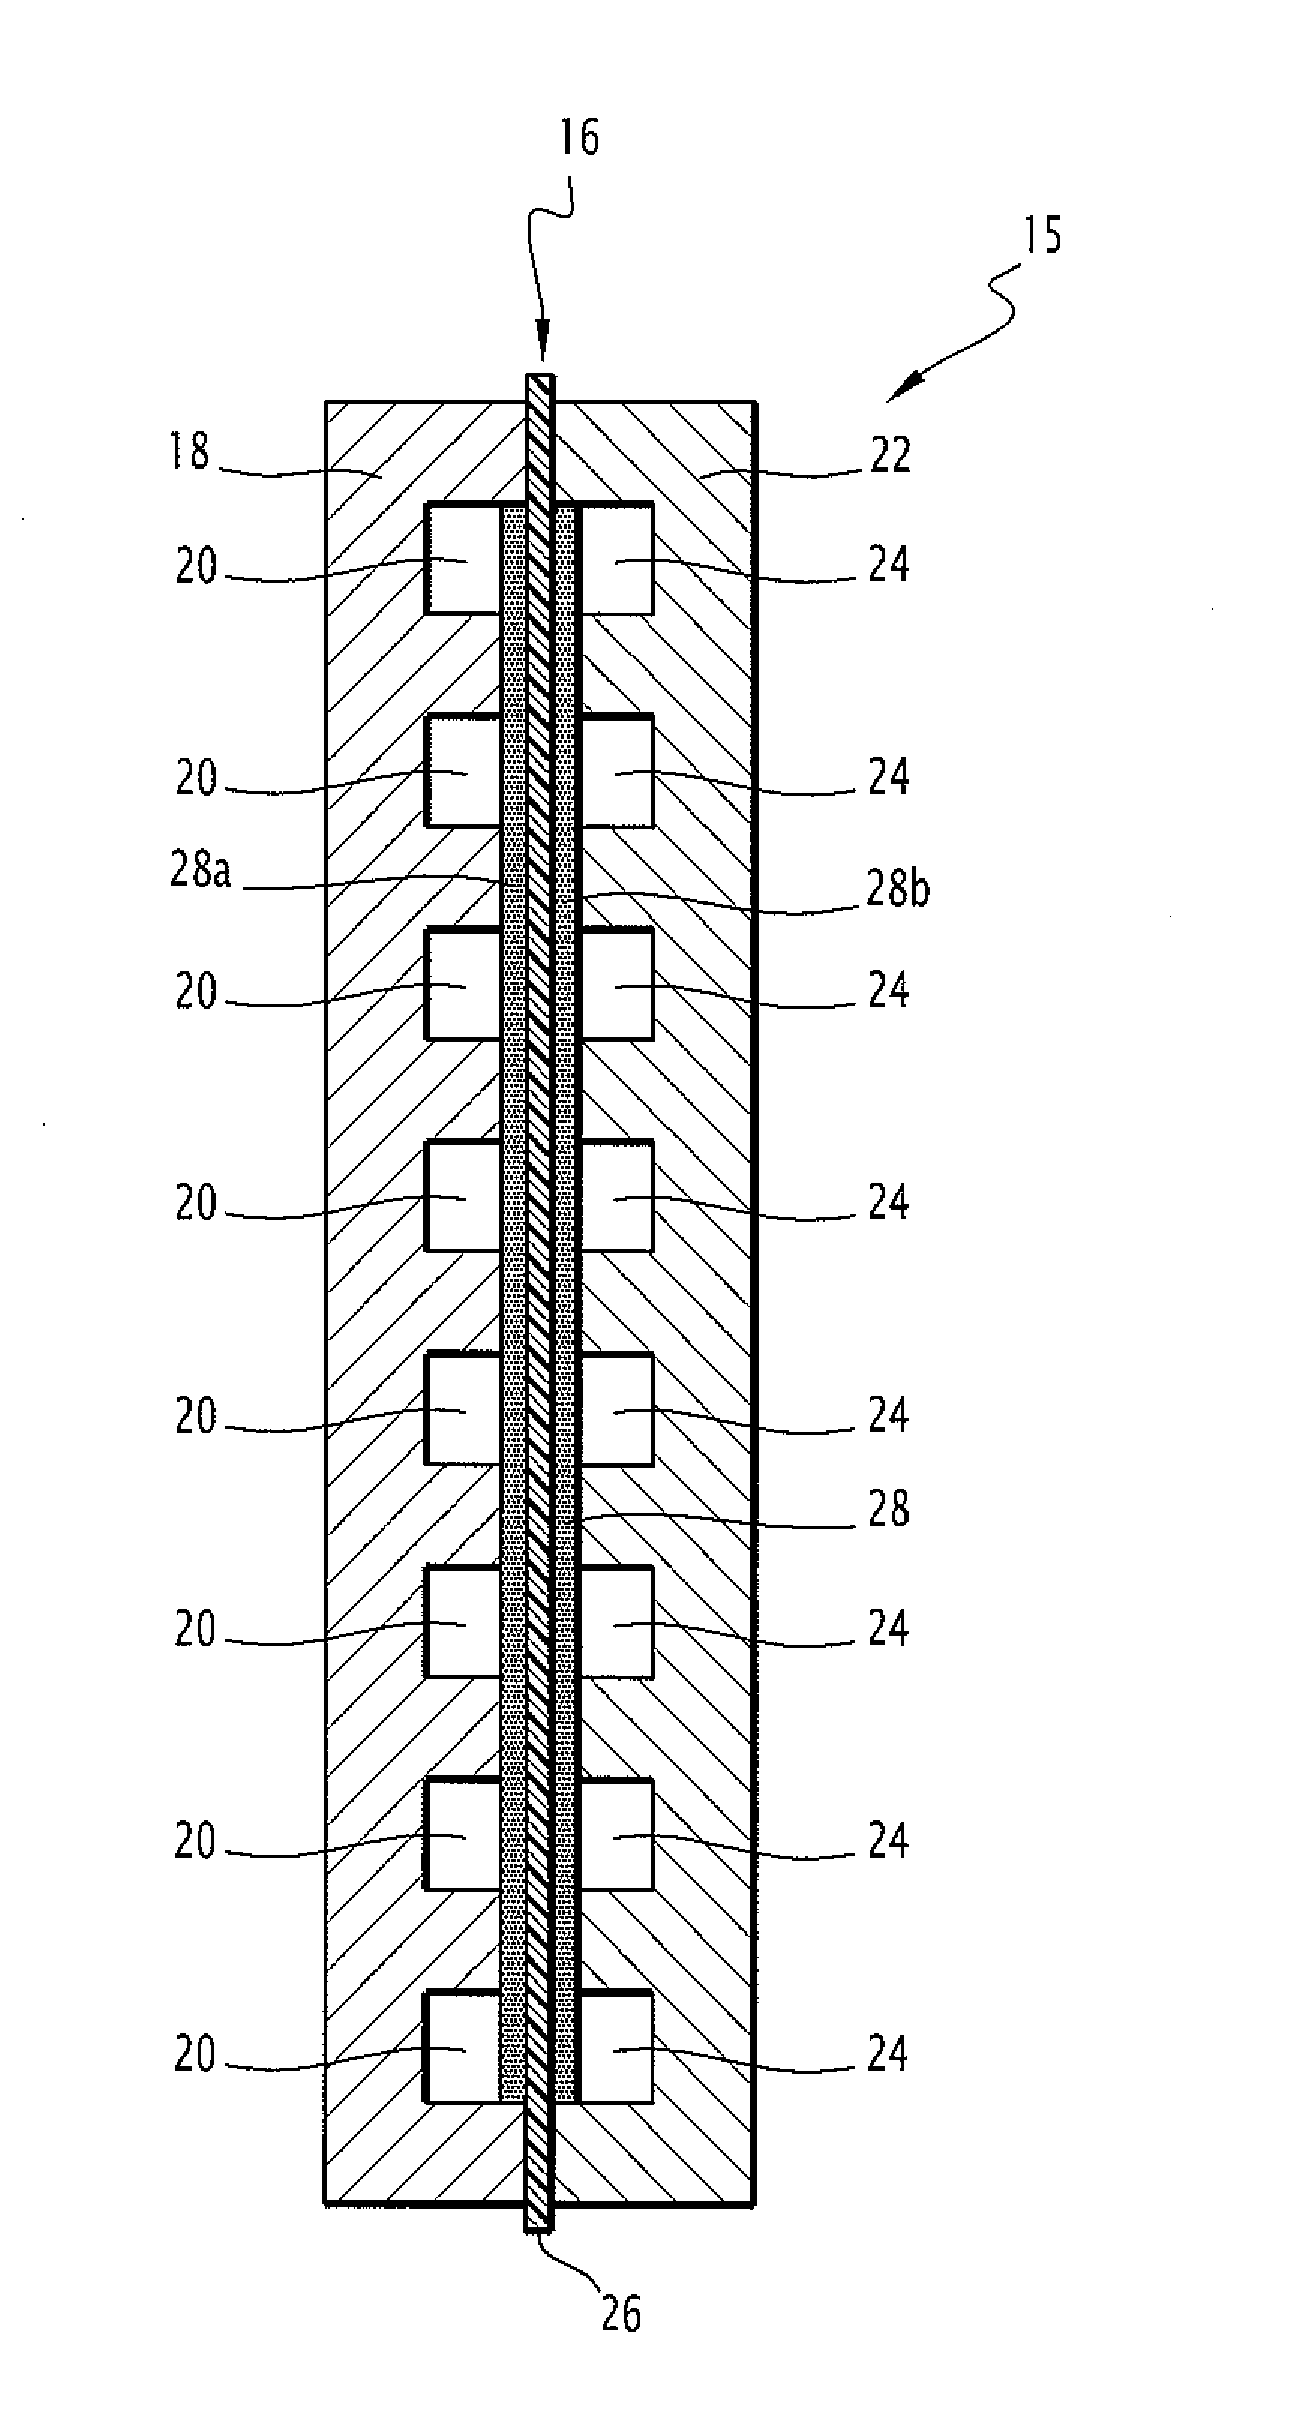 Battery comprising a plurality of elecrochemical cells and, for each cell, a device for controlling the voltage across the terminals of said cell